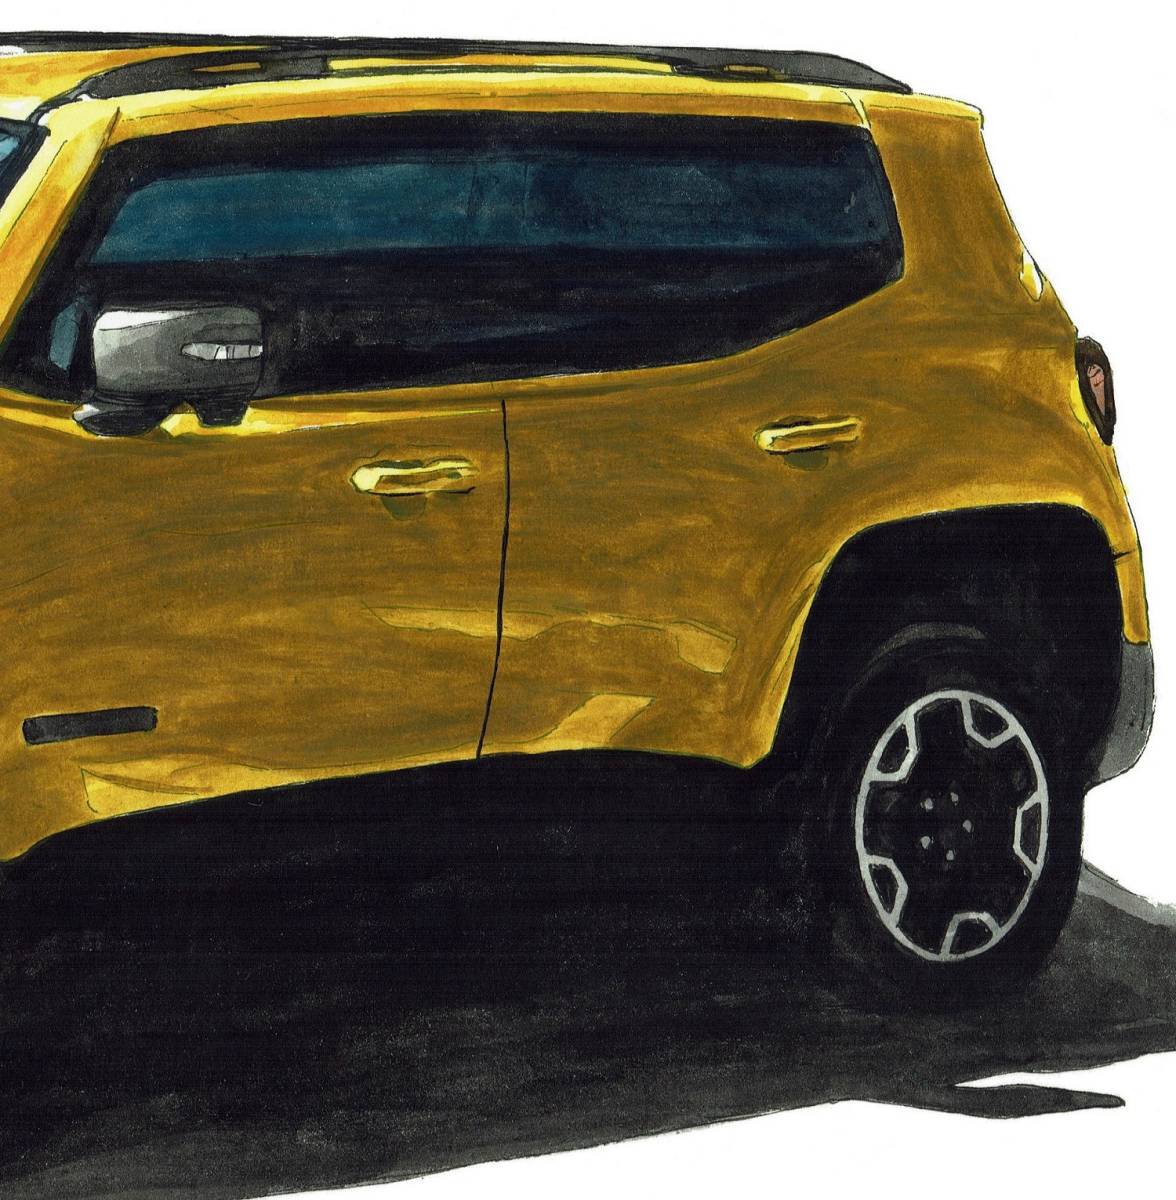 GC-1773 Jeep renegade *GC-1774 Jeep Cherokee limitation version .300 part autograph autograph have frame settled * author flat right .. hope number . please choose.